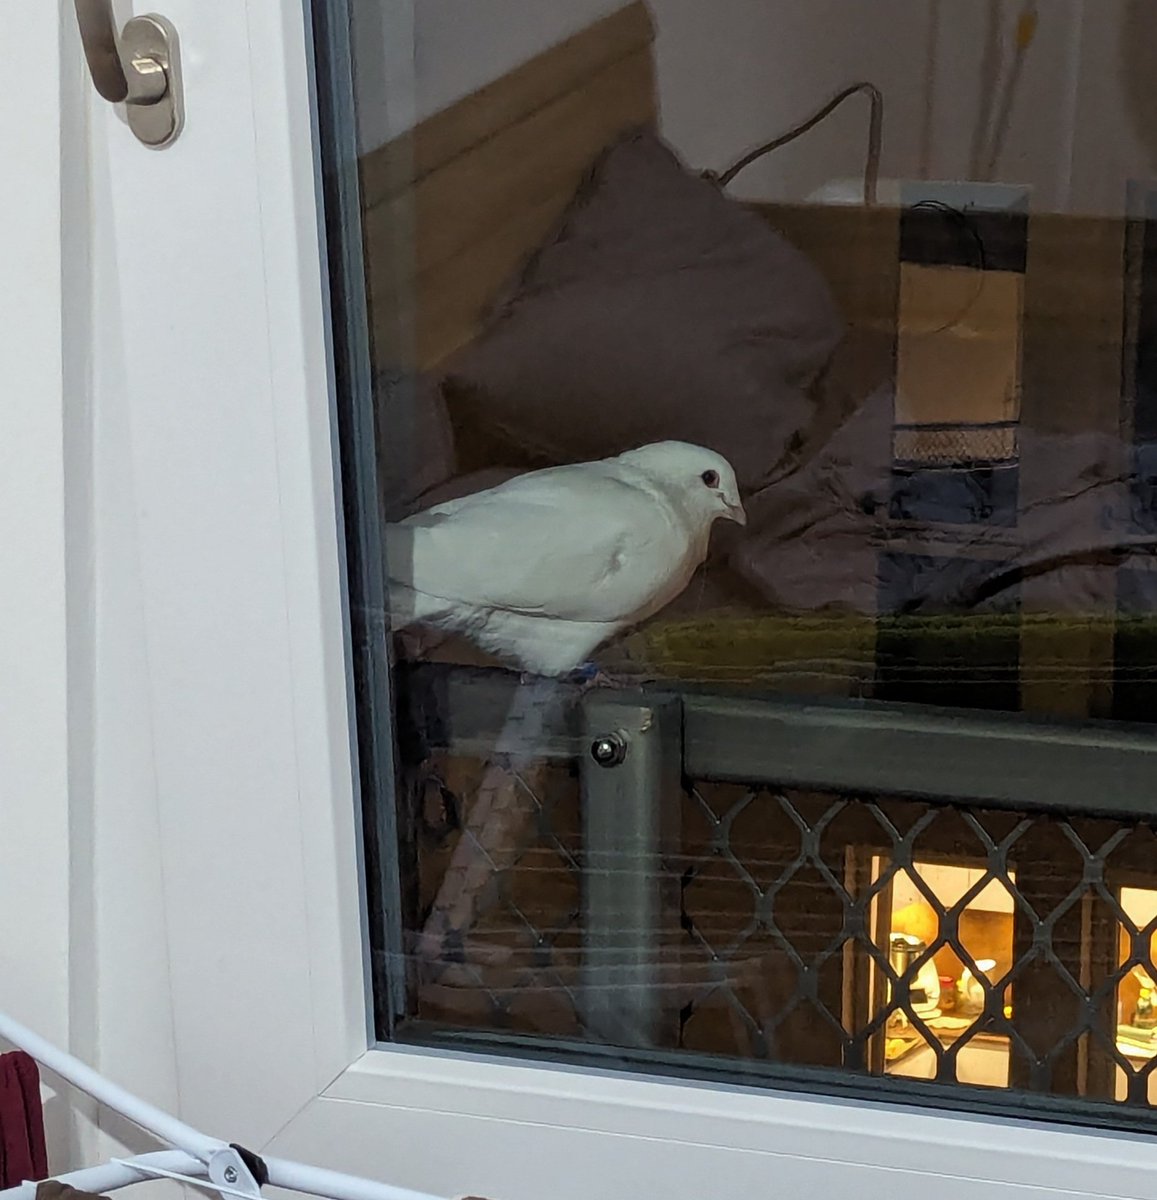 There was a pigeon with the leg ring on my window. Very domesticated (allowed me to touch his feathers but flew away when I moved my hand too fast). Placed some seeds and water on my window. Will see if he returns cuz his wing looks a bit damaged (?)